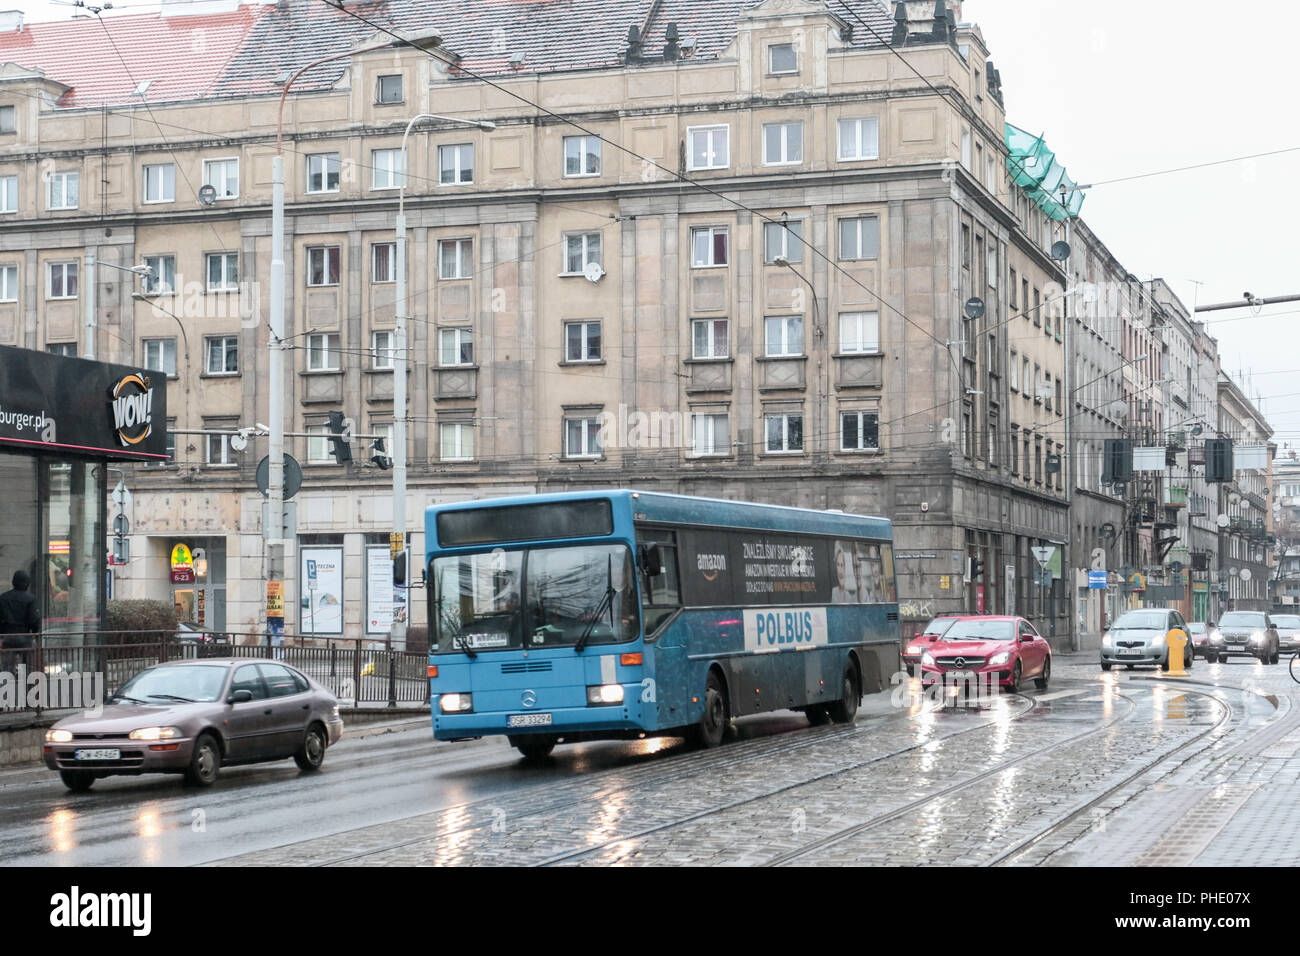 Old - ex German - bus in Wroclaw Stock Photo - Alamy